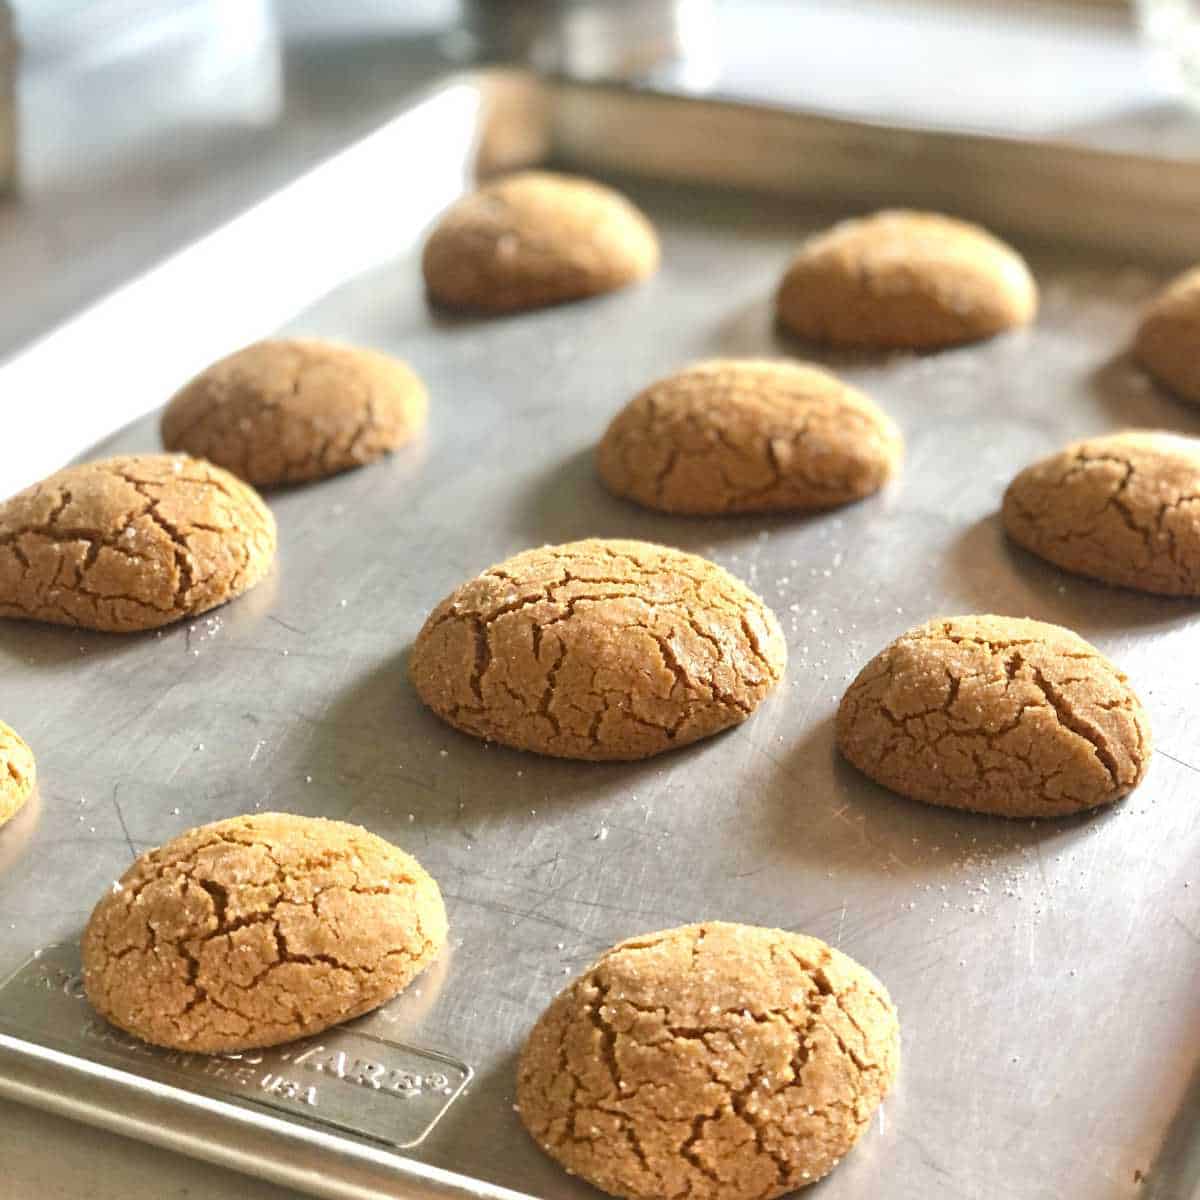 Baked gluten free ginger cookies on a baking sheet.